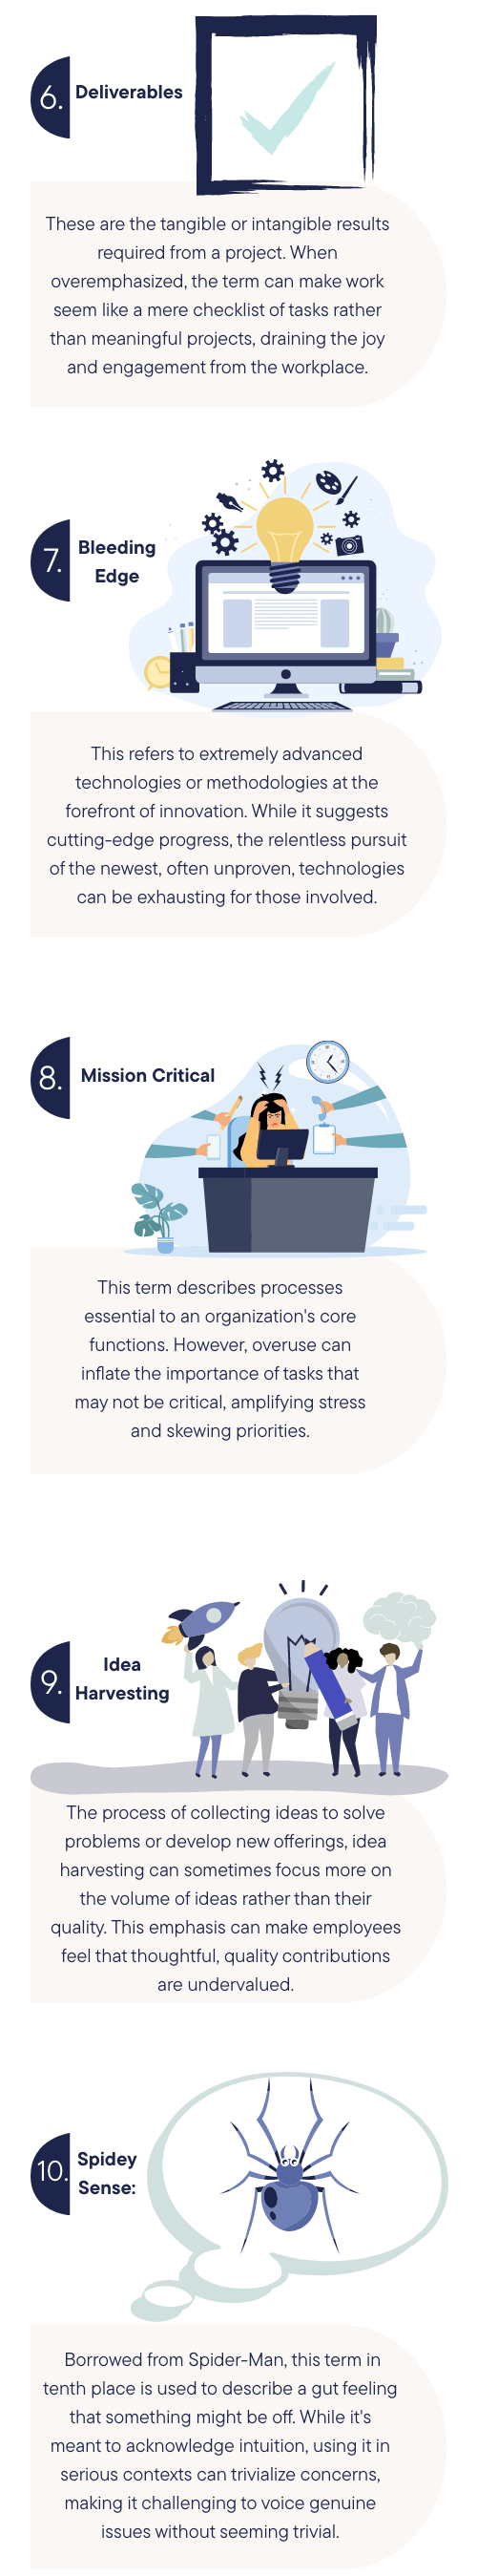 Infographic explaining five business terms: Deliverables, Bleeding Edge, Mission Critical, Idea Harvesting, and Spidey Sense, each with an accompanying icon and brief description.